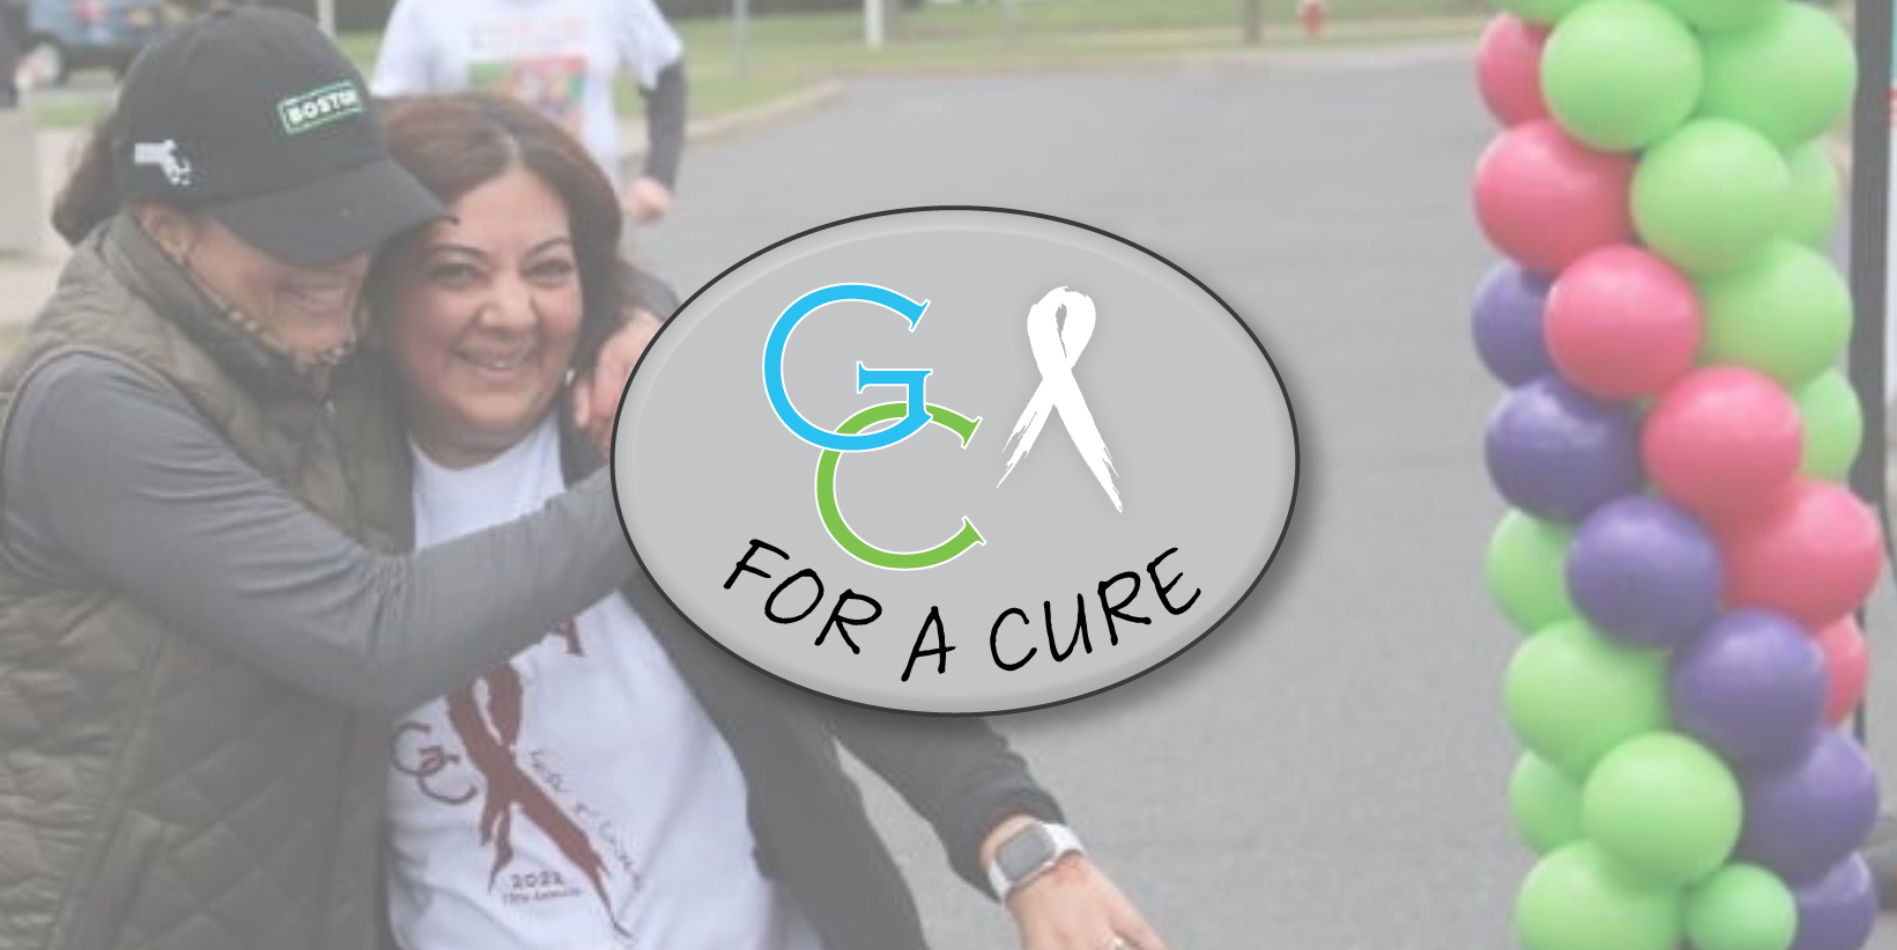 GC for a Cure 5K Run/Walk (NYC Network) promotional image